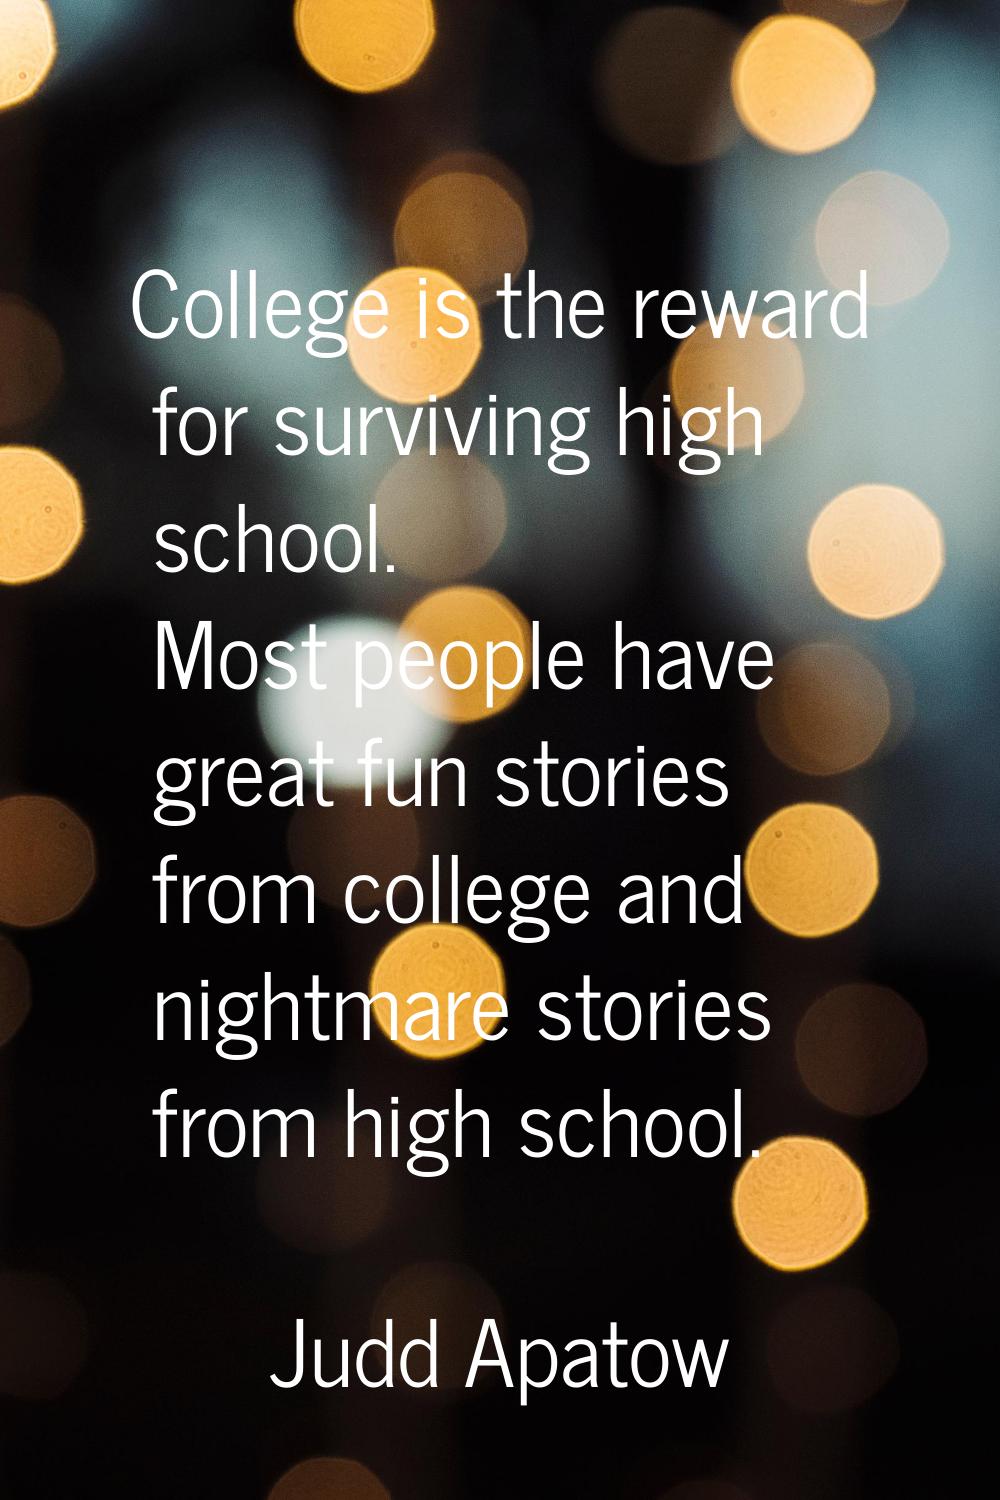 College is the reward for surviving high school. Most people have great fun stories from college an